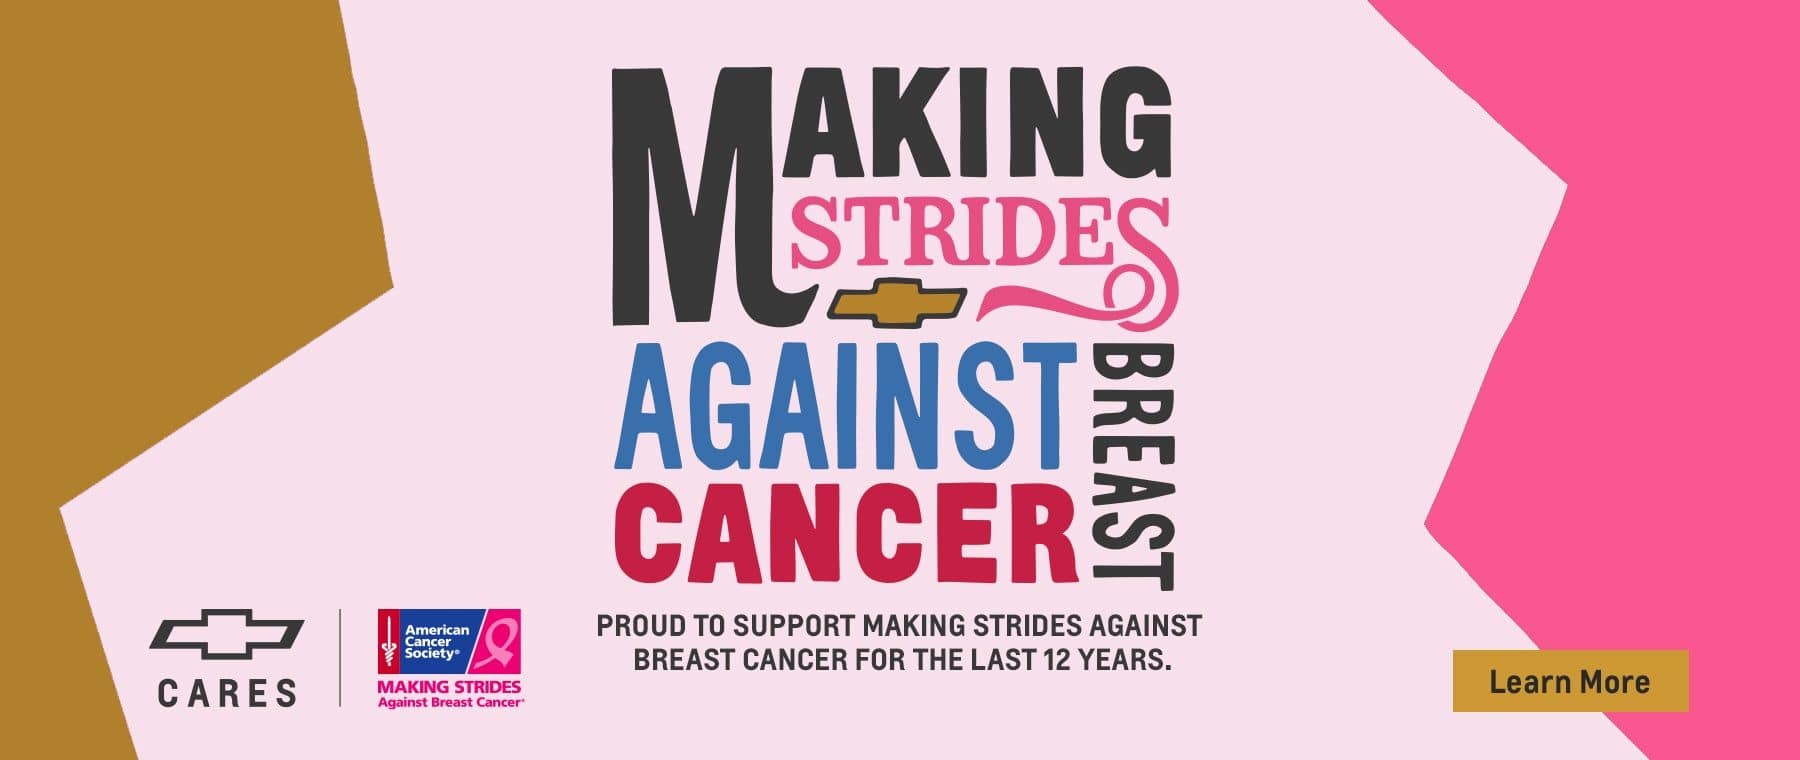 Making Strides Against Breast Cancer. Proud to support making strides against breast cancer for the last 12 years.